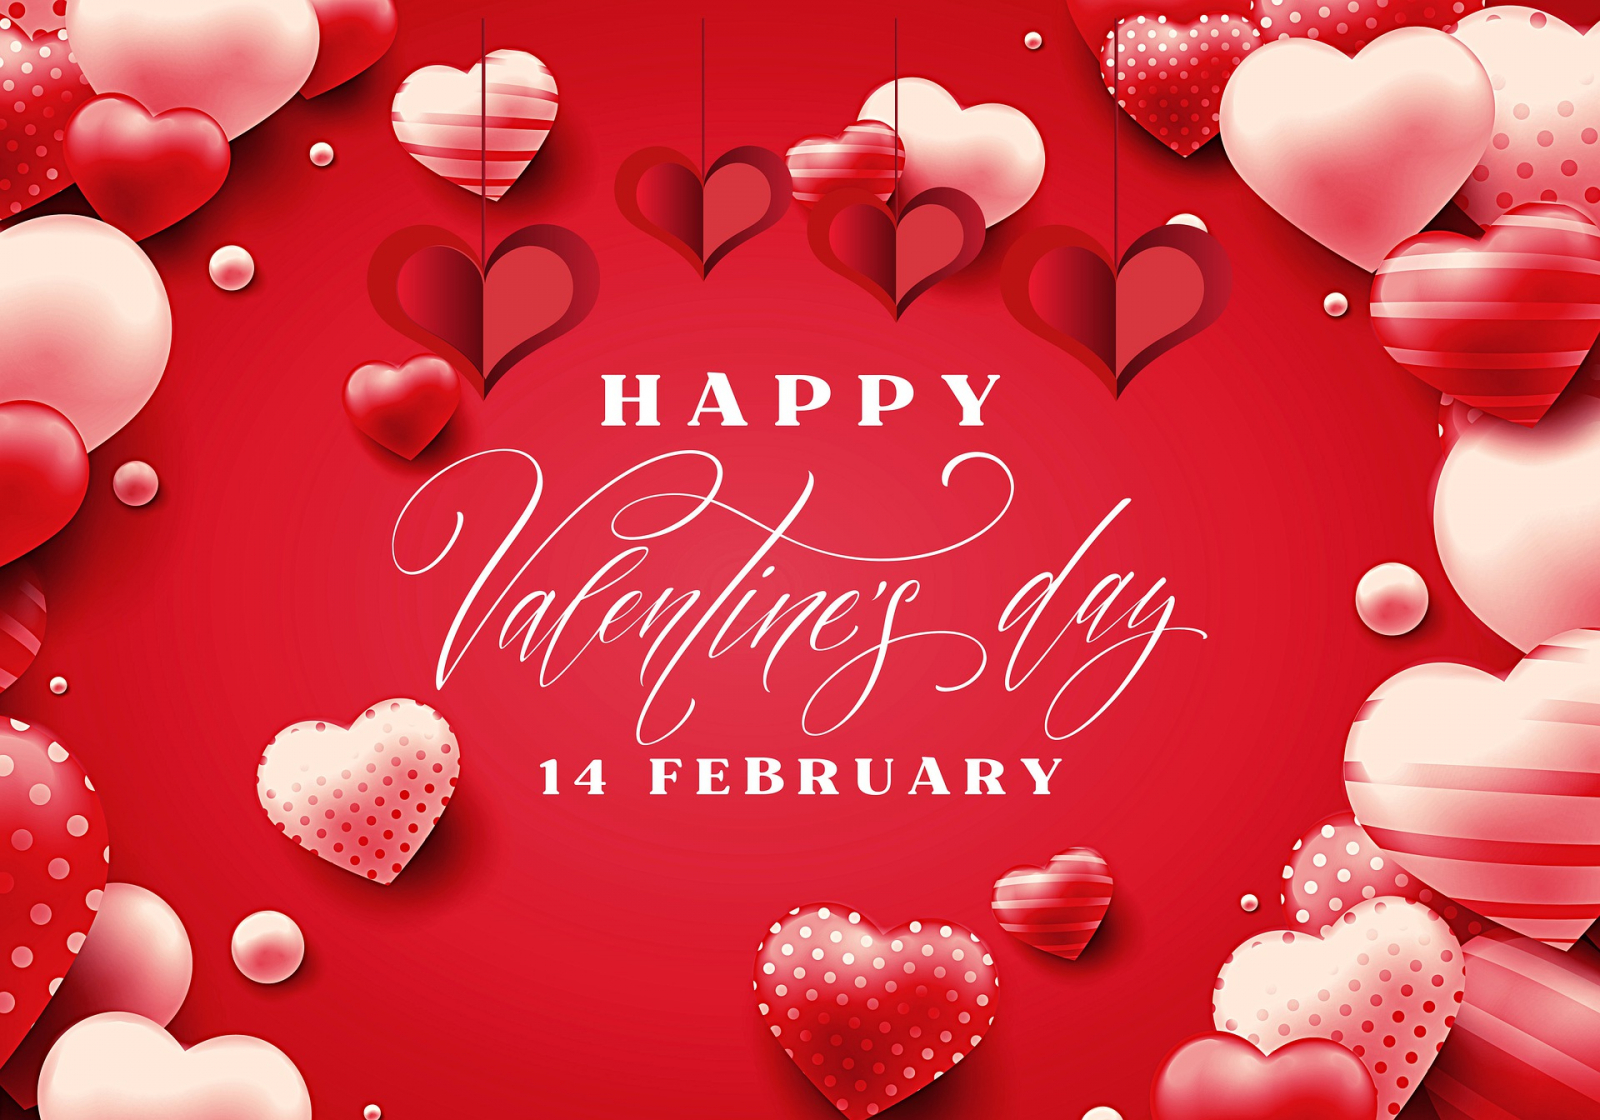 Happy Valentine's Day 2023: Messages, Greetings, Wishes, Quotes, Images,  and More